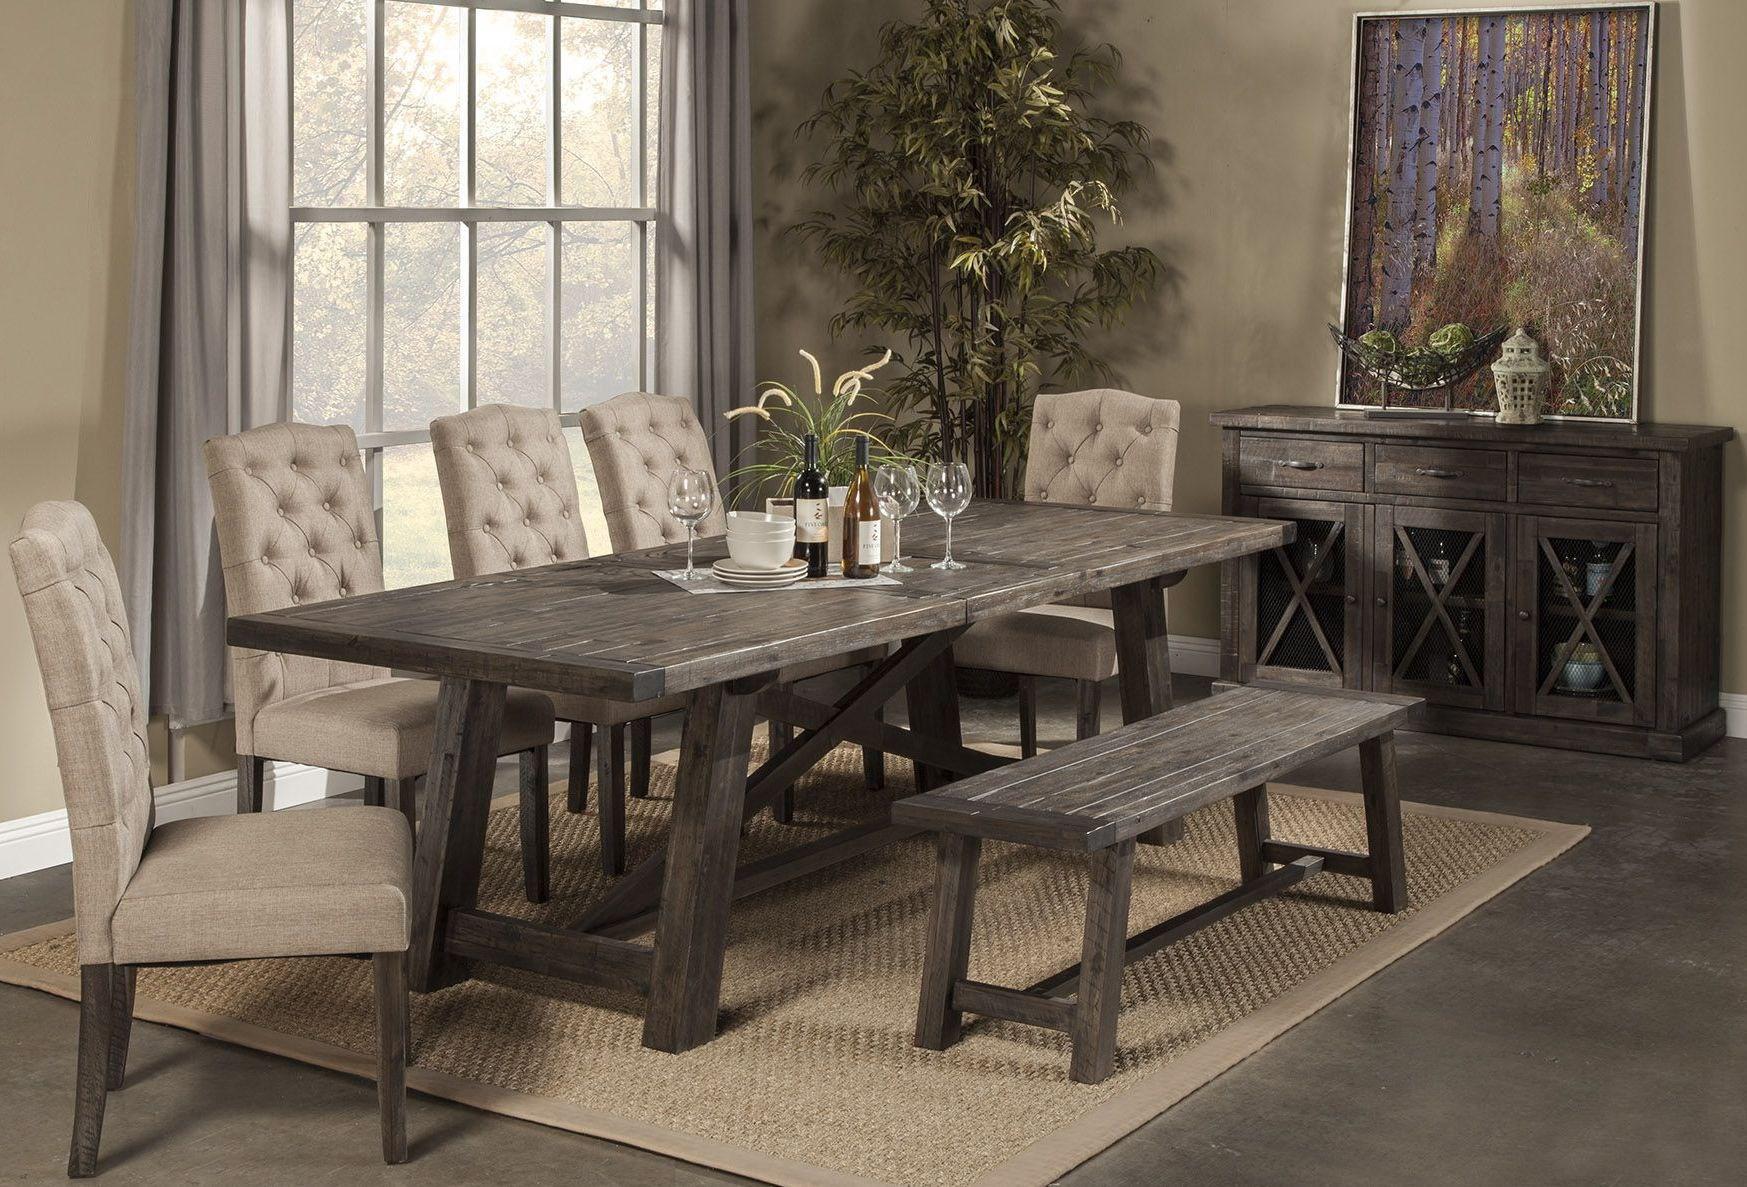 Alpine Furniture NEWBERRY Dining Table